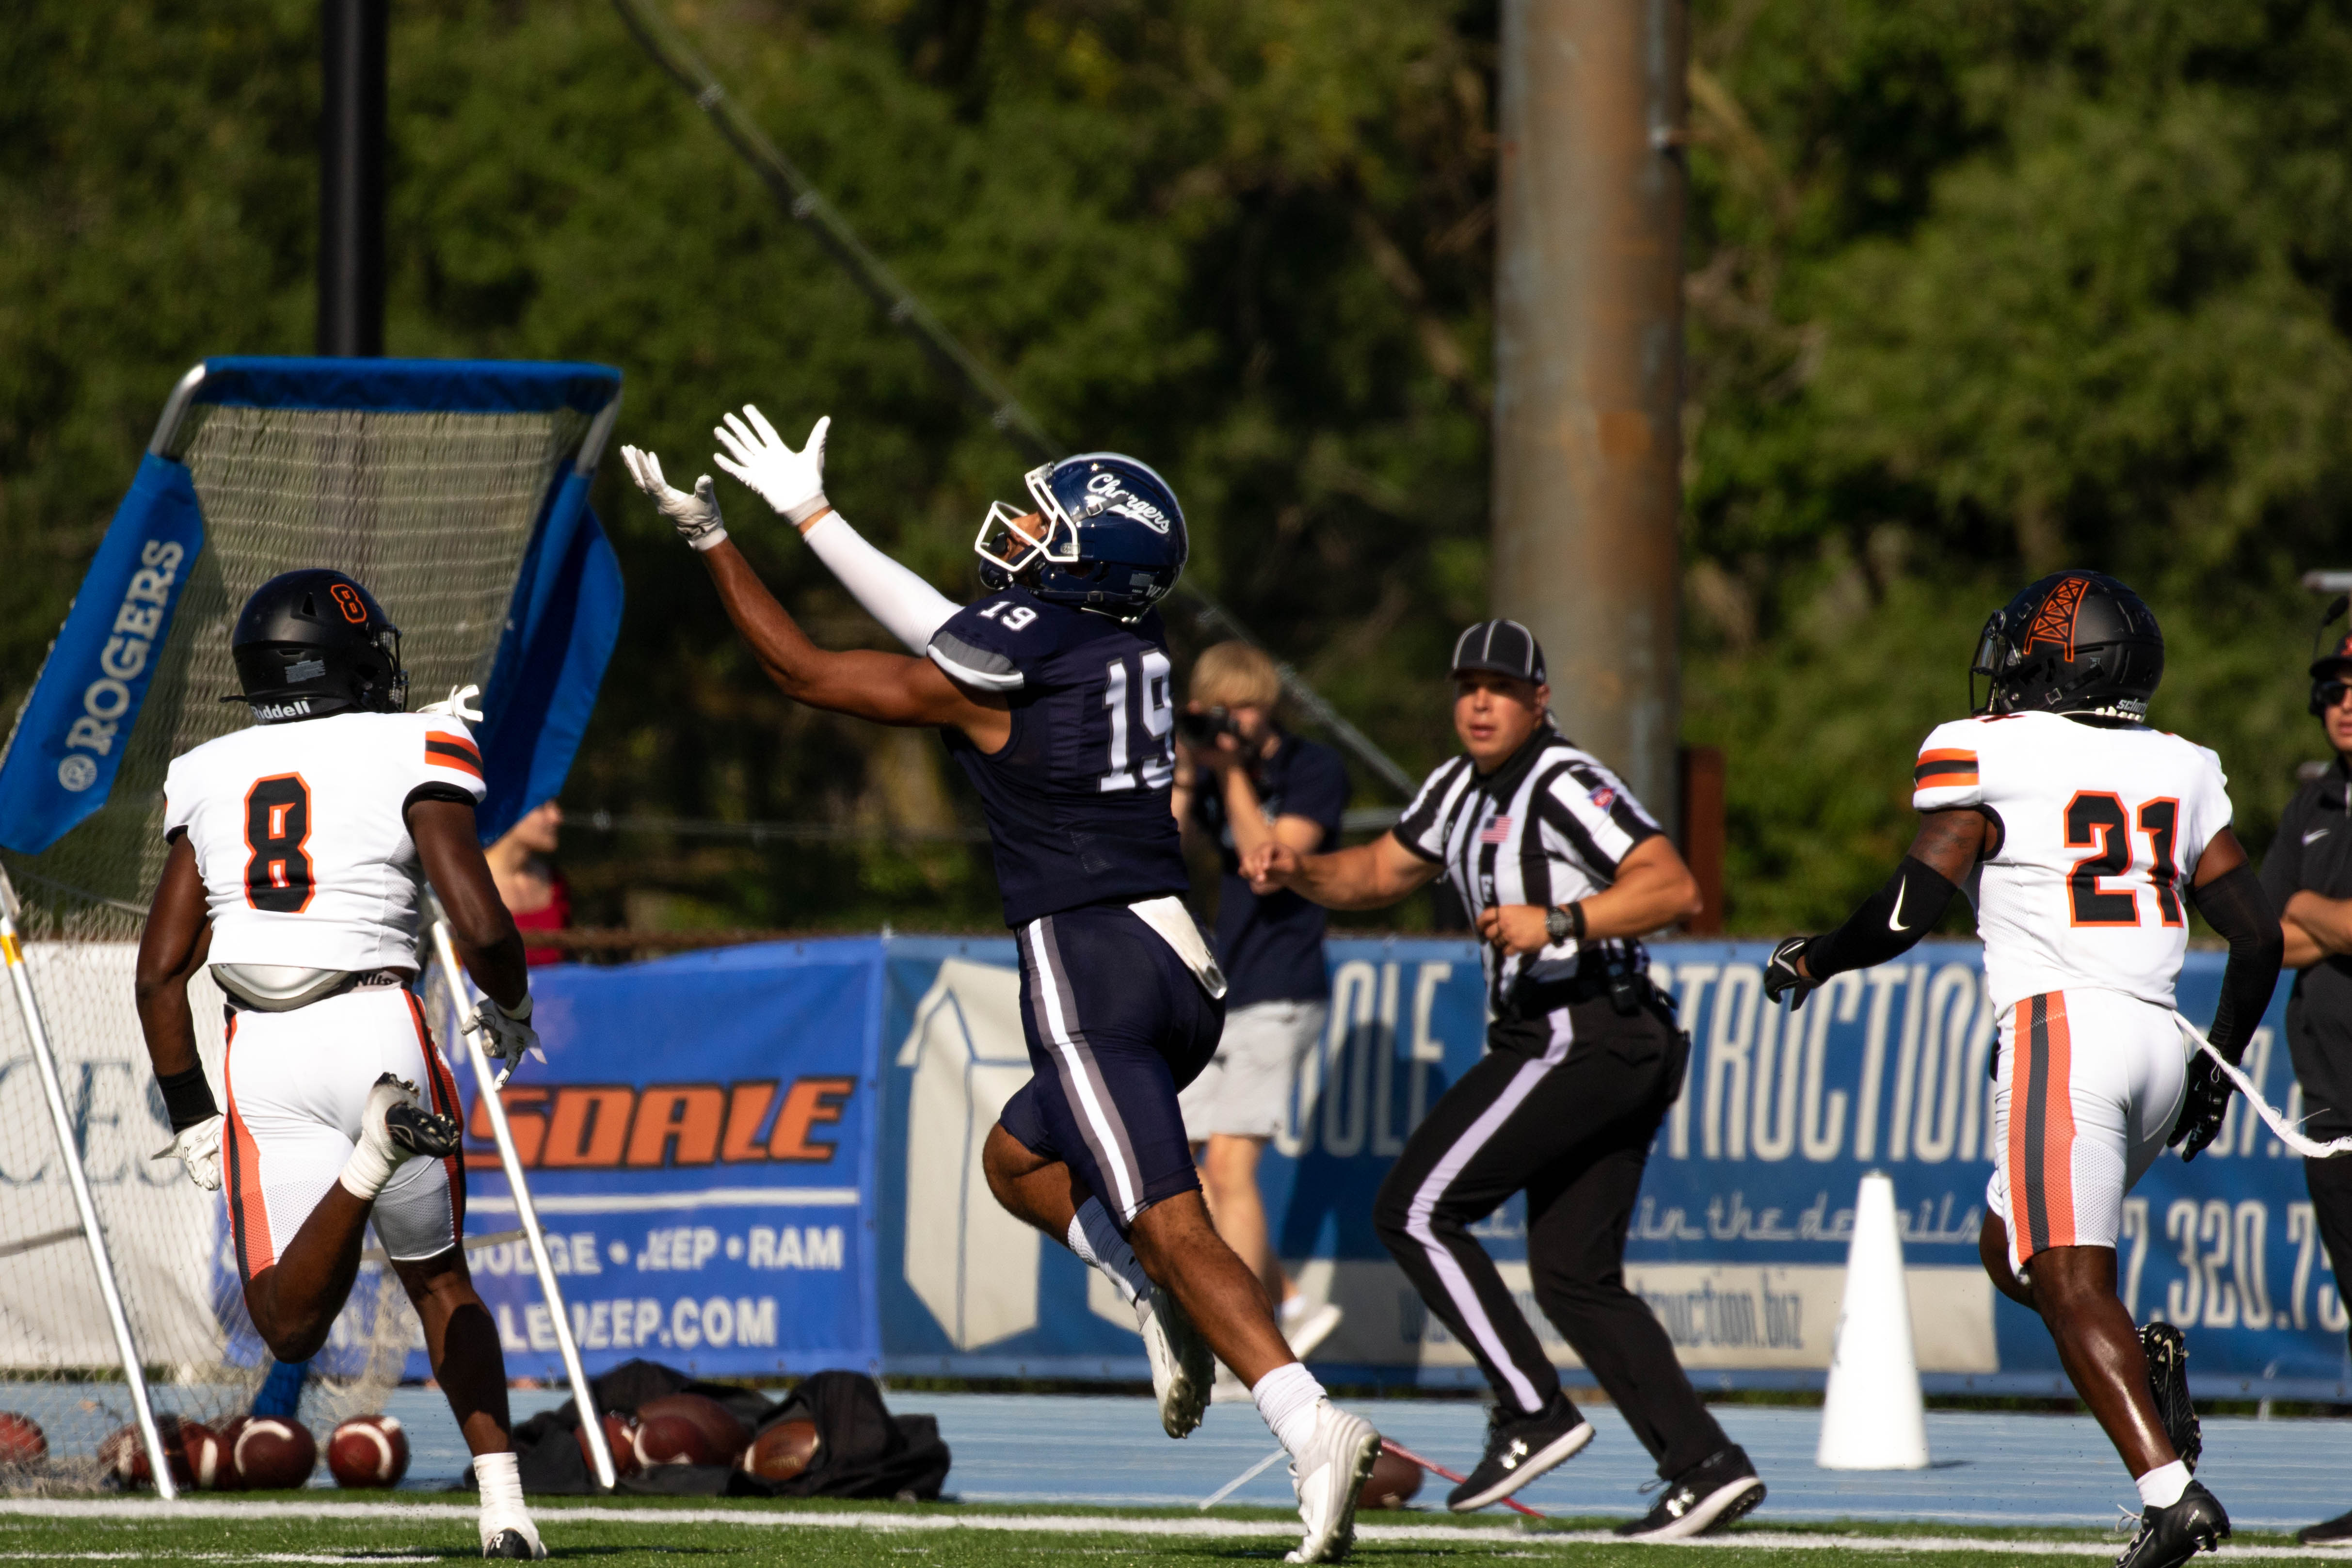 Chargers fall short of homecoming victory - Hillsdale Collegian